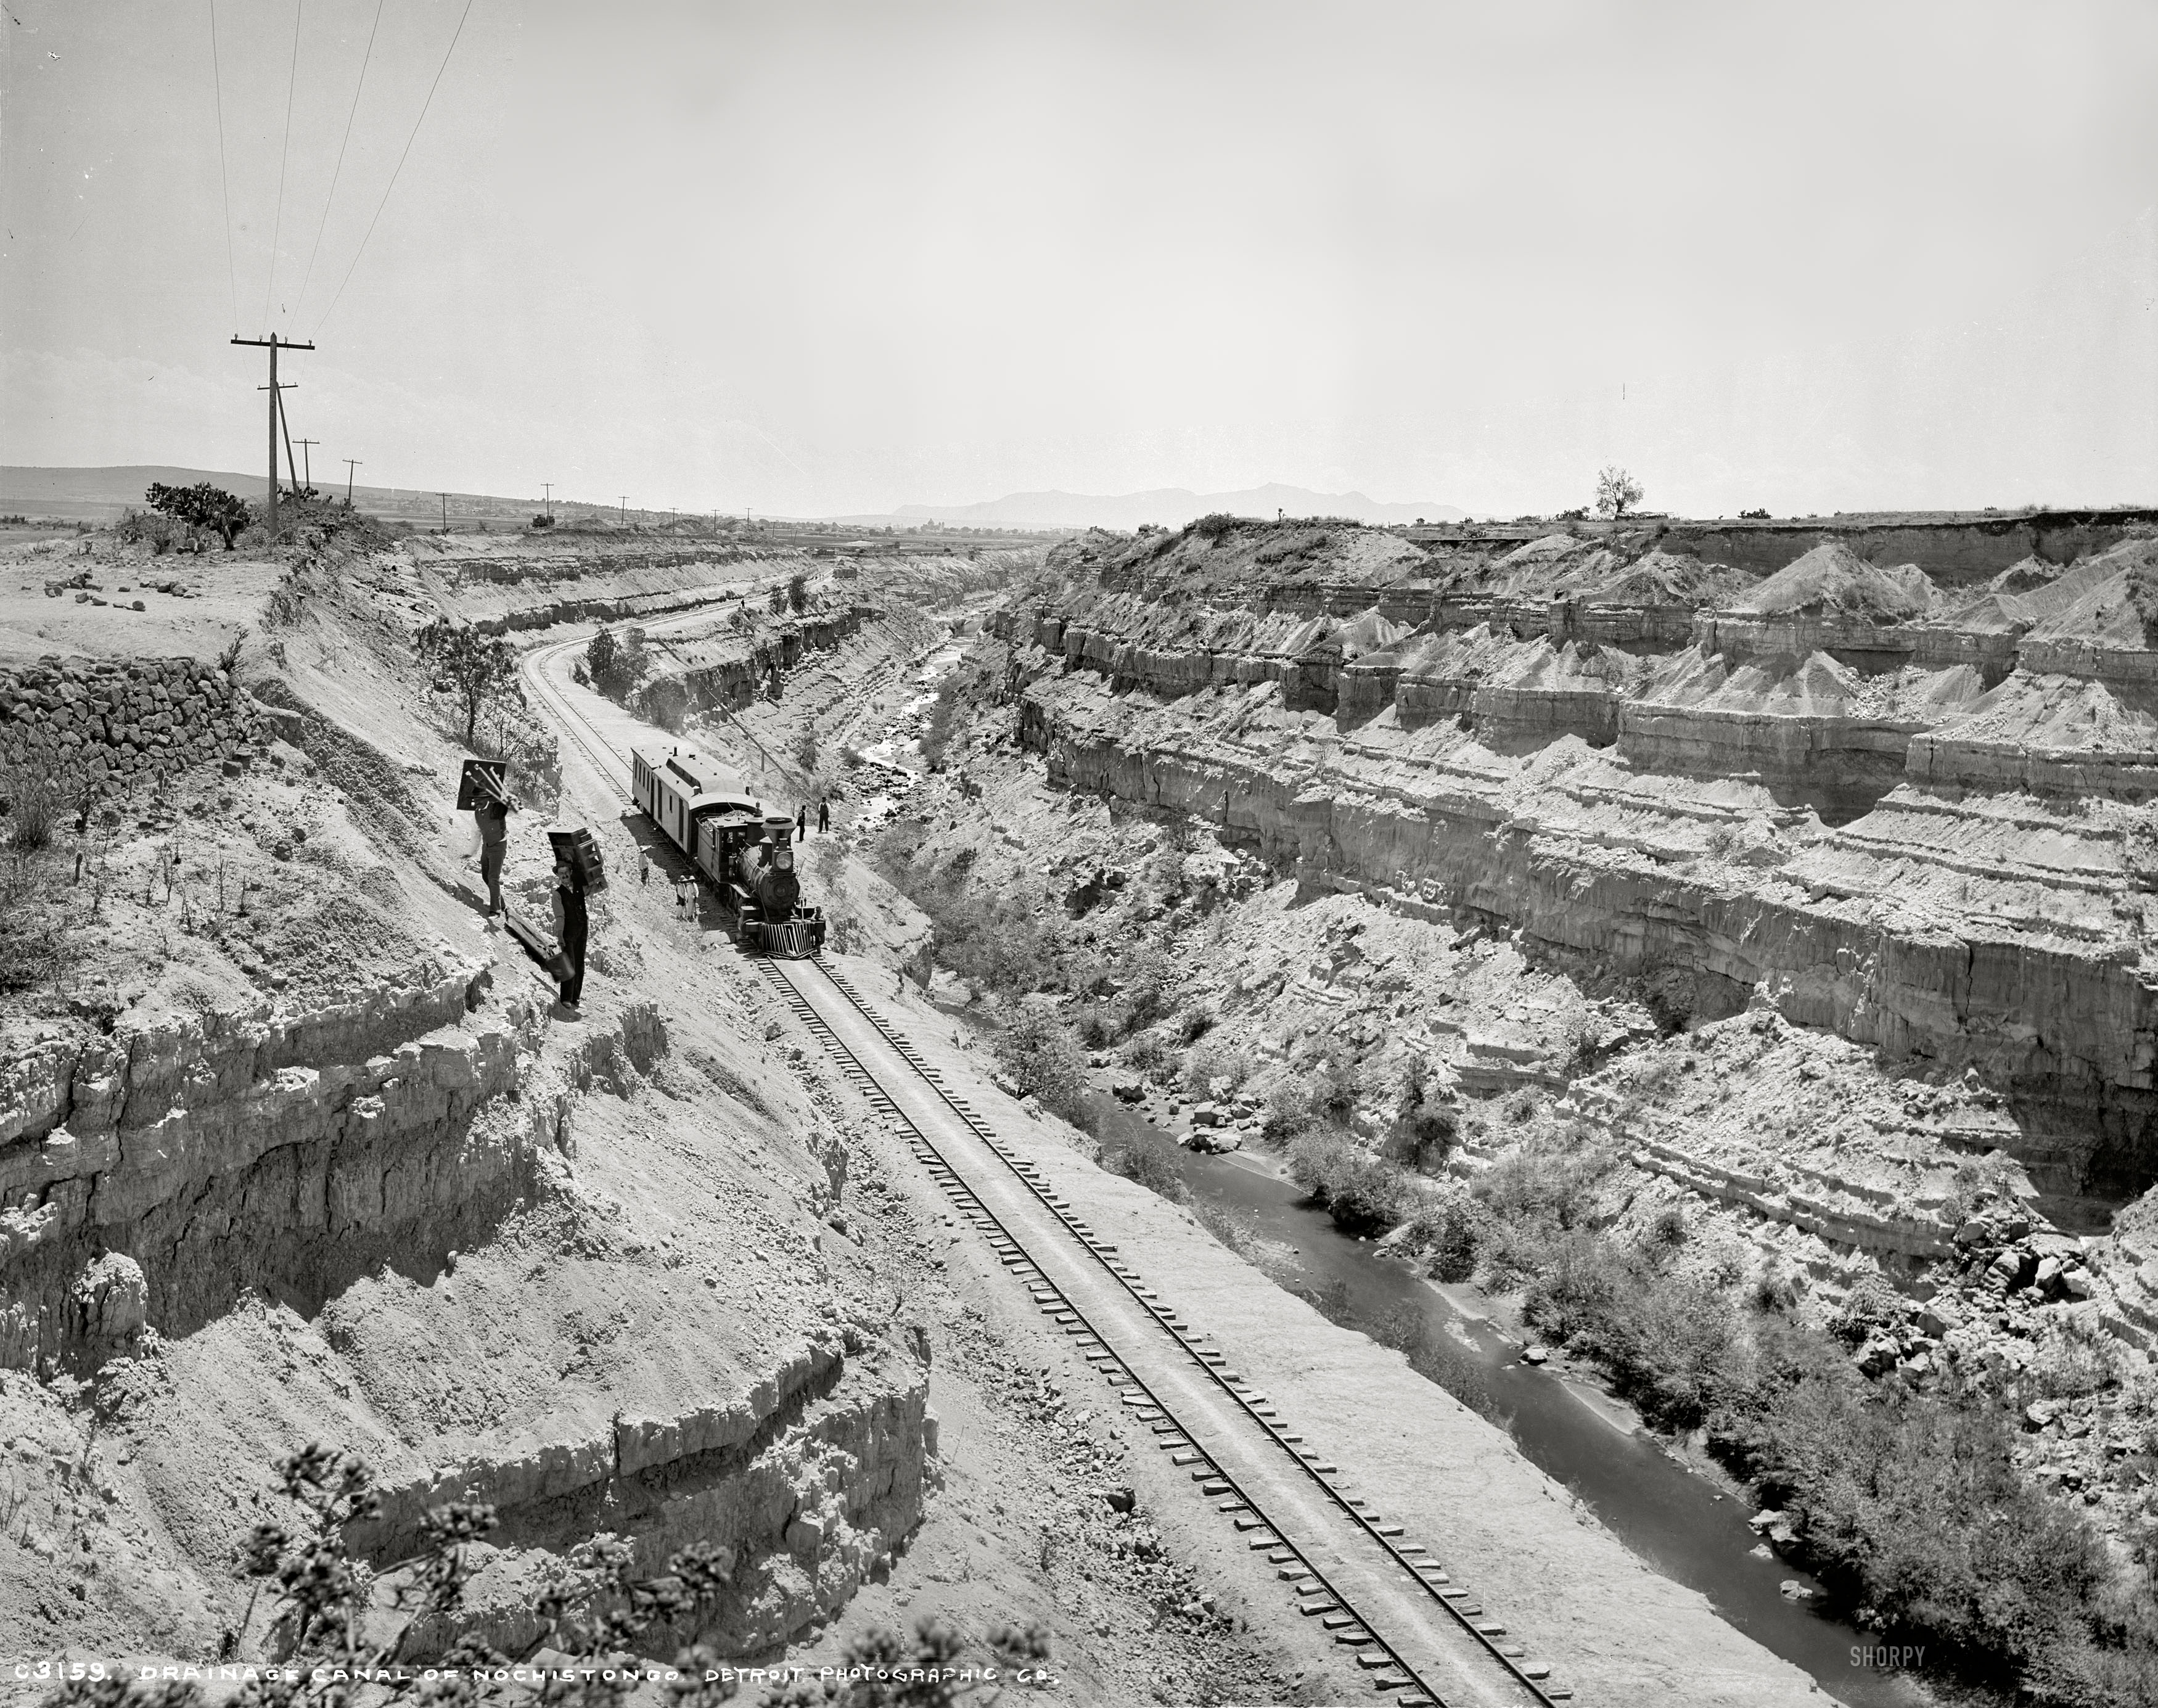 Mexico circa 1891. "Ferrocarill Central Mexicano. Canal of Nochistongo," a drainage excavated in the 17th and 18th centuries to keep Mexico City from flooding. Note the giant camera and tripod employed by William Henry Jackson in the making of his heroically proportioned photographs, the largest of which were recorded on a medium the archivists call "mammoth plates" -- glass negatives that measured 18 by 22 inches. (This particular image was made on an 8x10 inch glass plate -- what modern photographers would consider "large format," but still only a fifth the size of an 18x22.) Detroit Publishing Co. glass negative. View full size.